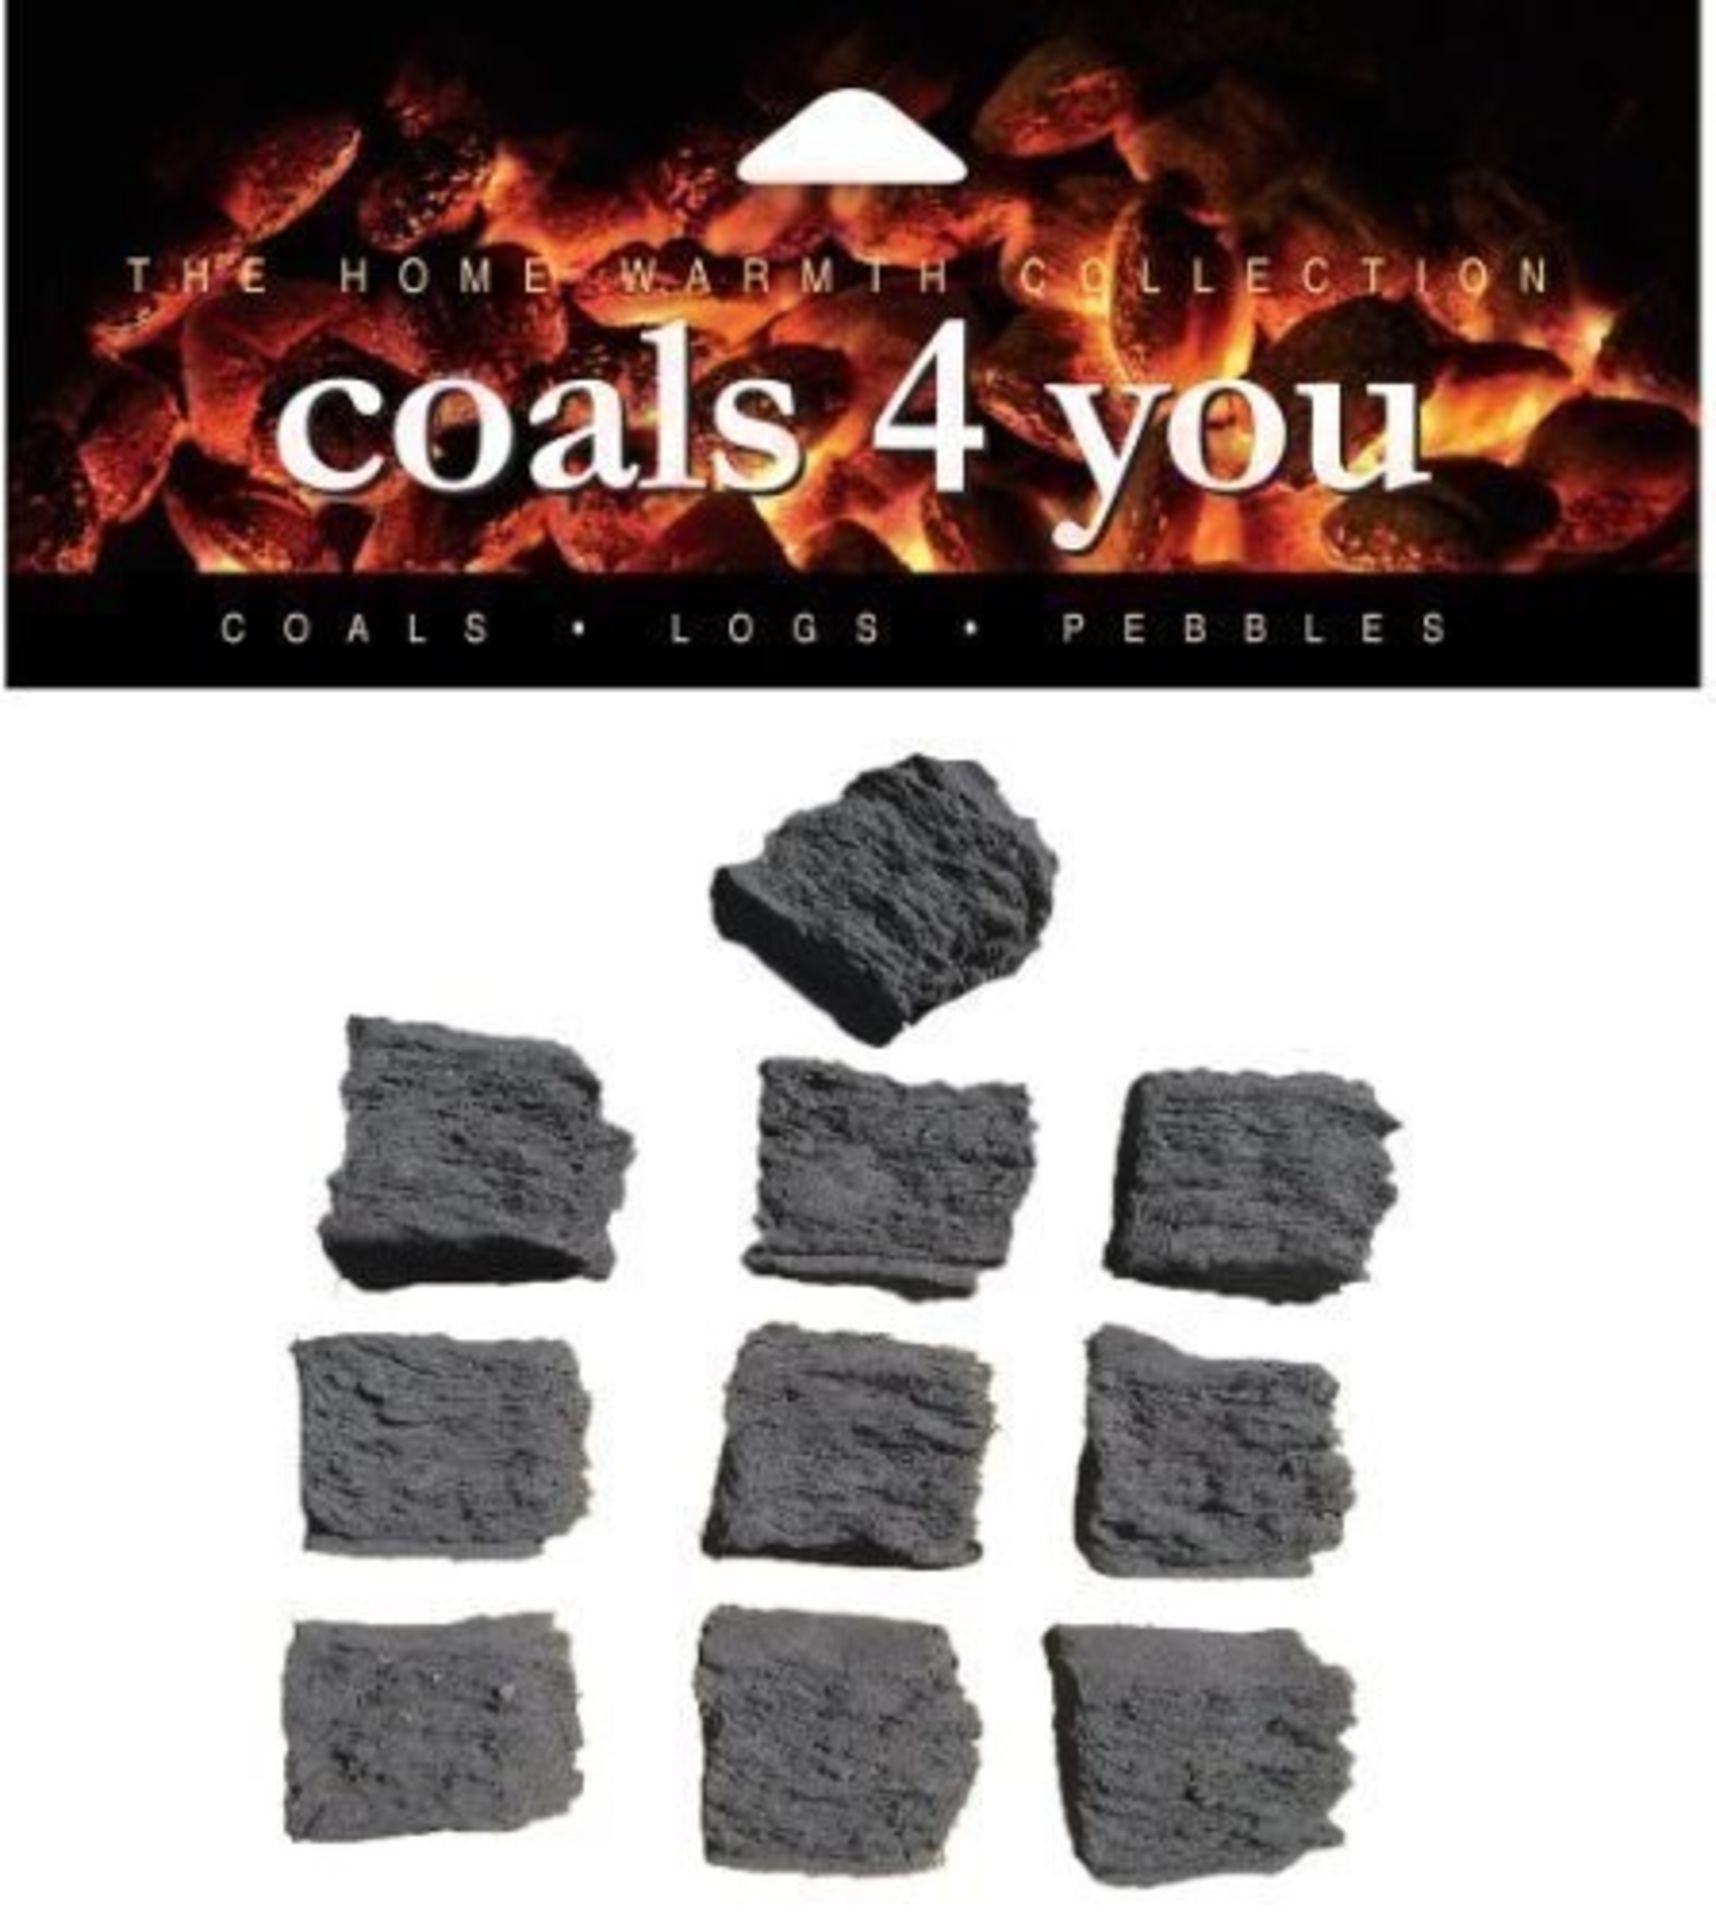 COALS 4 YOU 20 GAS FIRE CERAMIC COALS STANDARD SIZE IN BRANDED PACKAGING